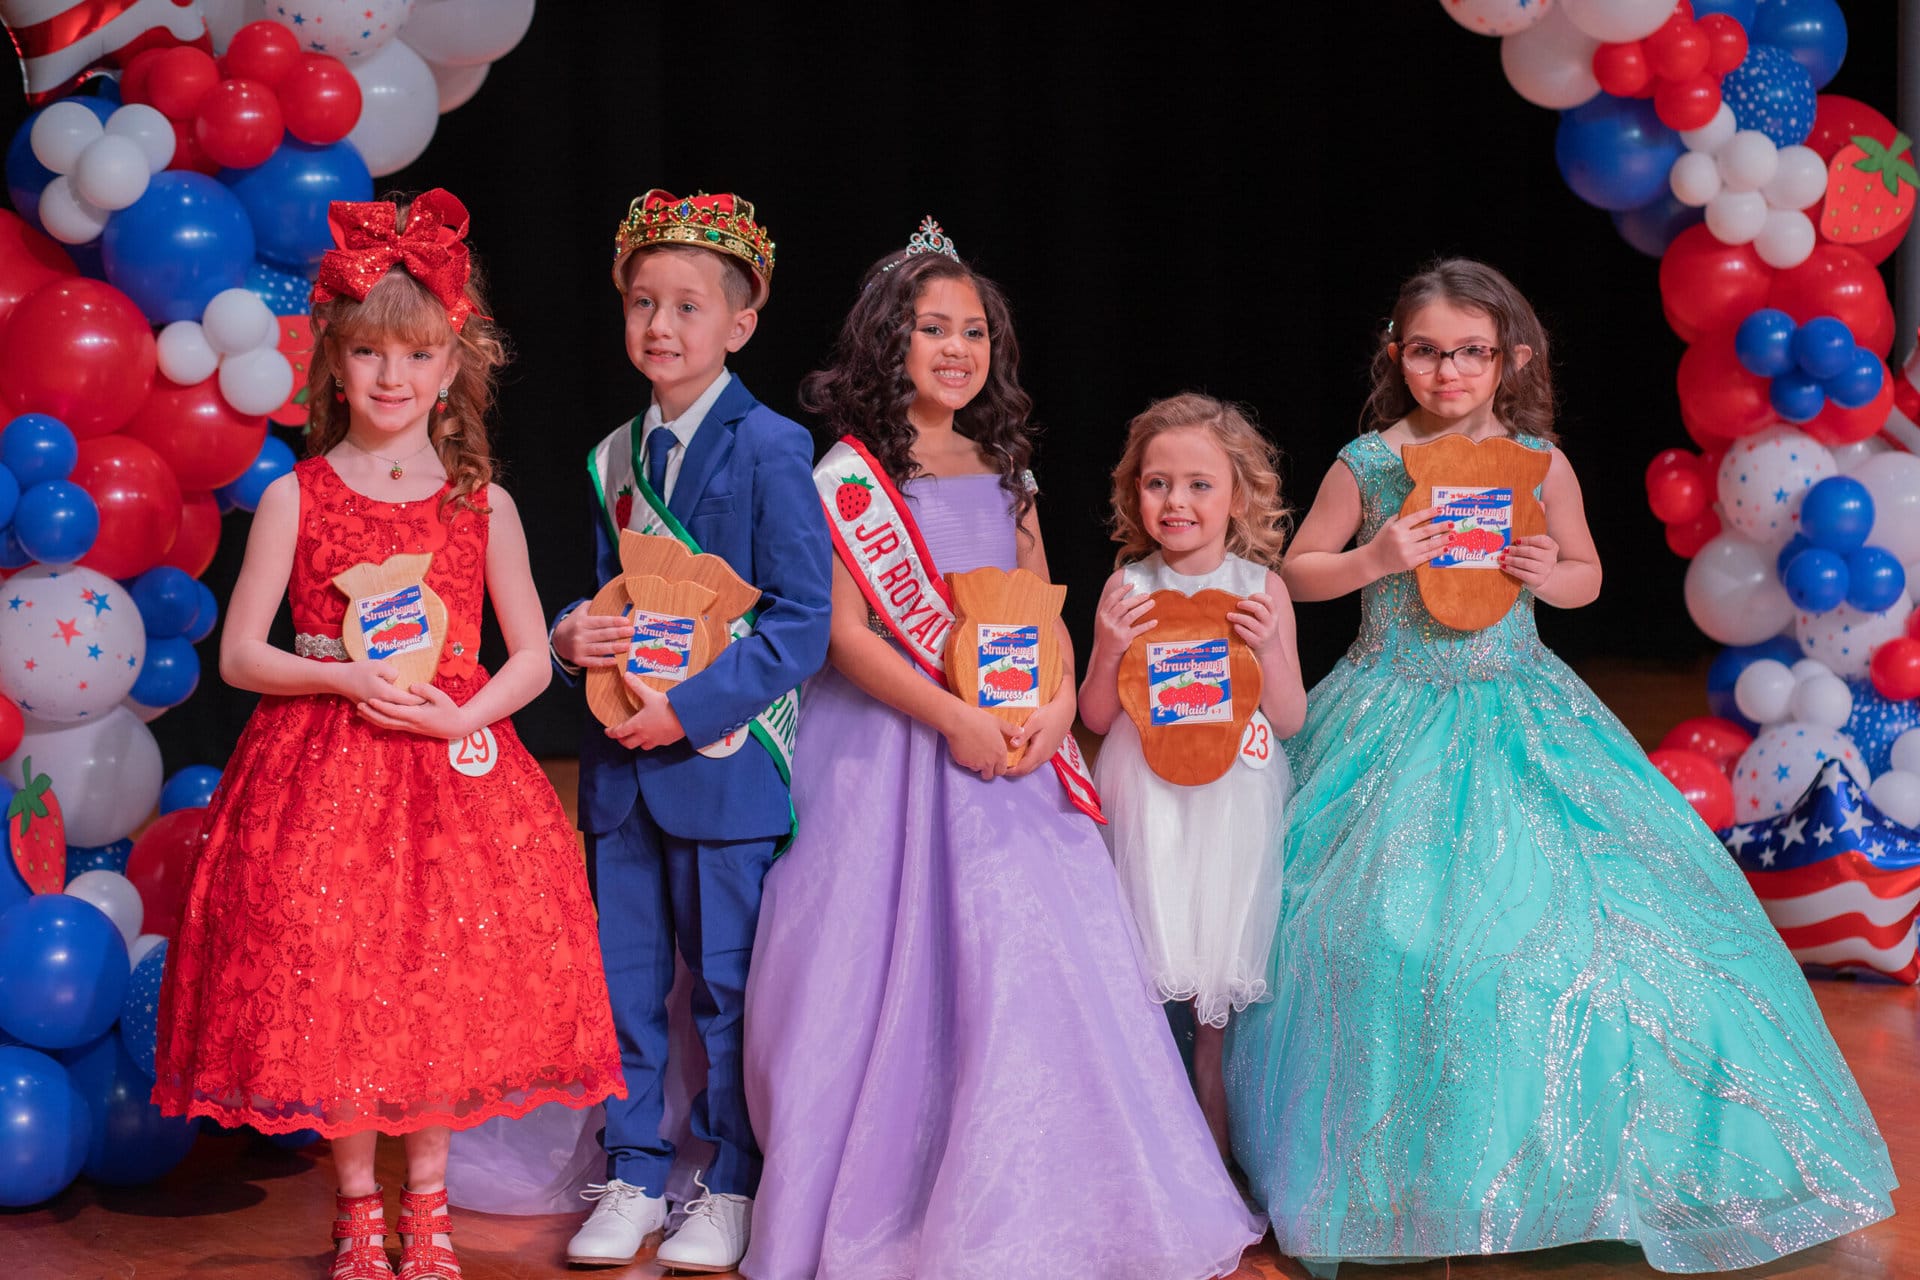 Strawberry Festival selects 2023 Junior Royalty Queen and court at